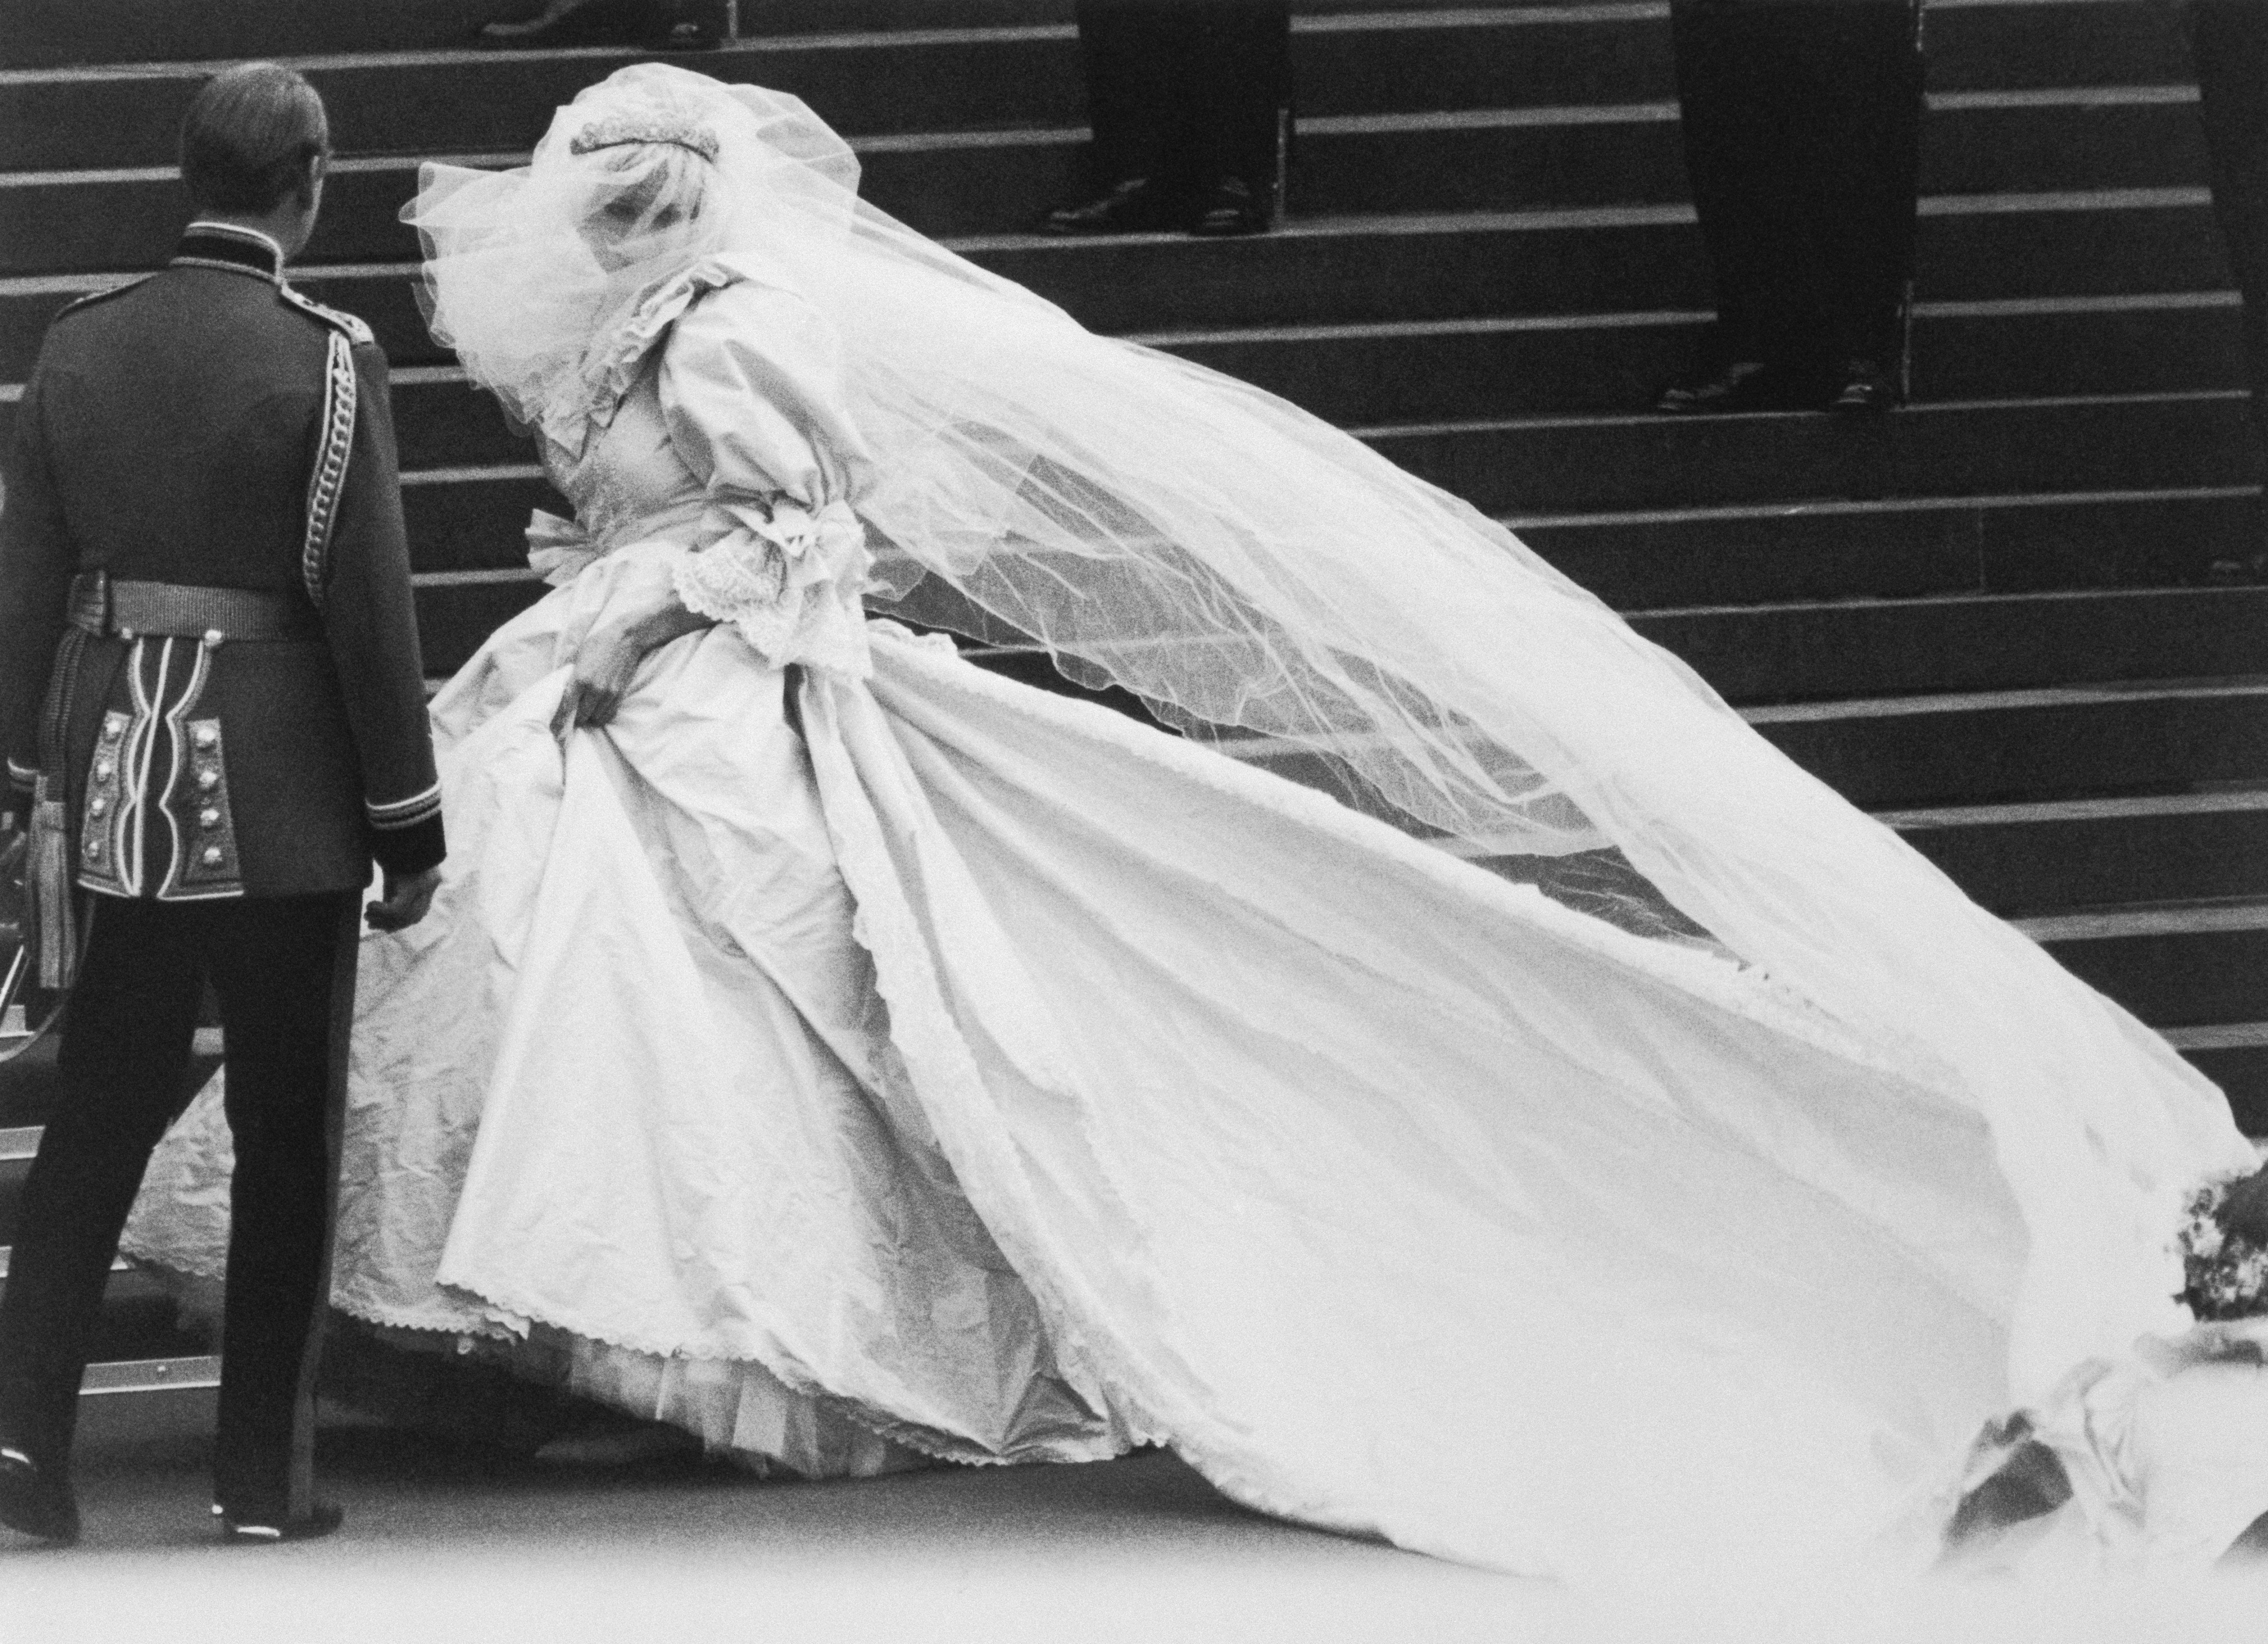 Lady Diana Spencer arrives at St. Paul's Cathedral on her wedding day, revealing to the world the wedding dress which had been carefully guarded during its design. (Bettmann—Bettmann Archive)